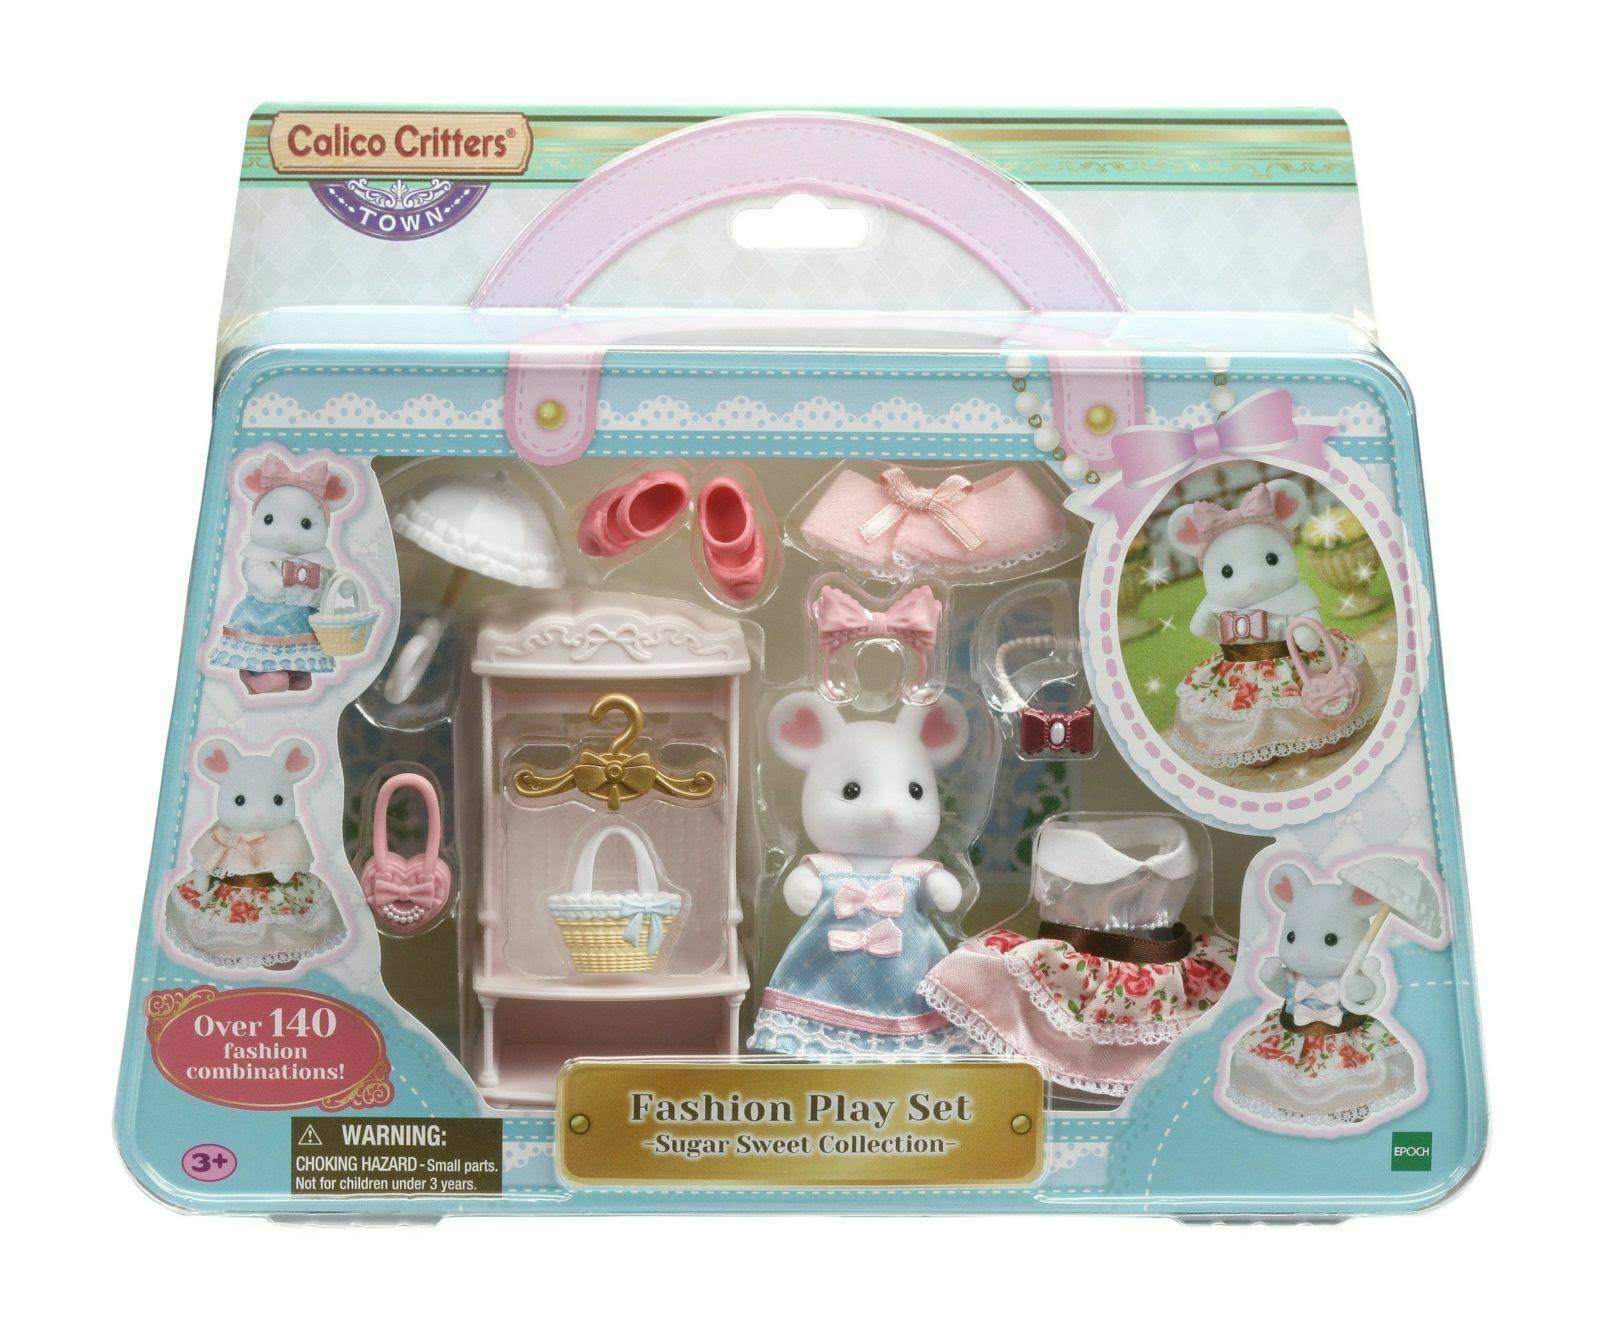 Calico Critters - Fashion Playset, Sugar Sweet Collection